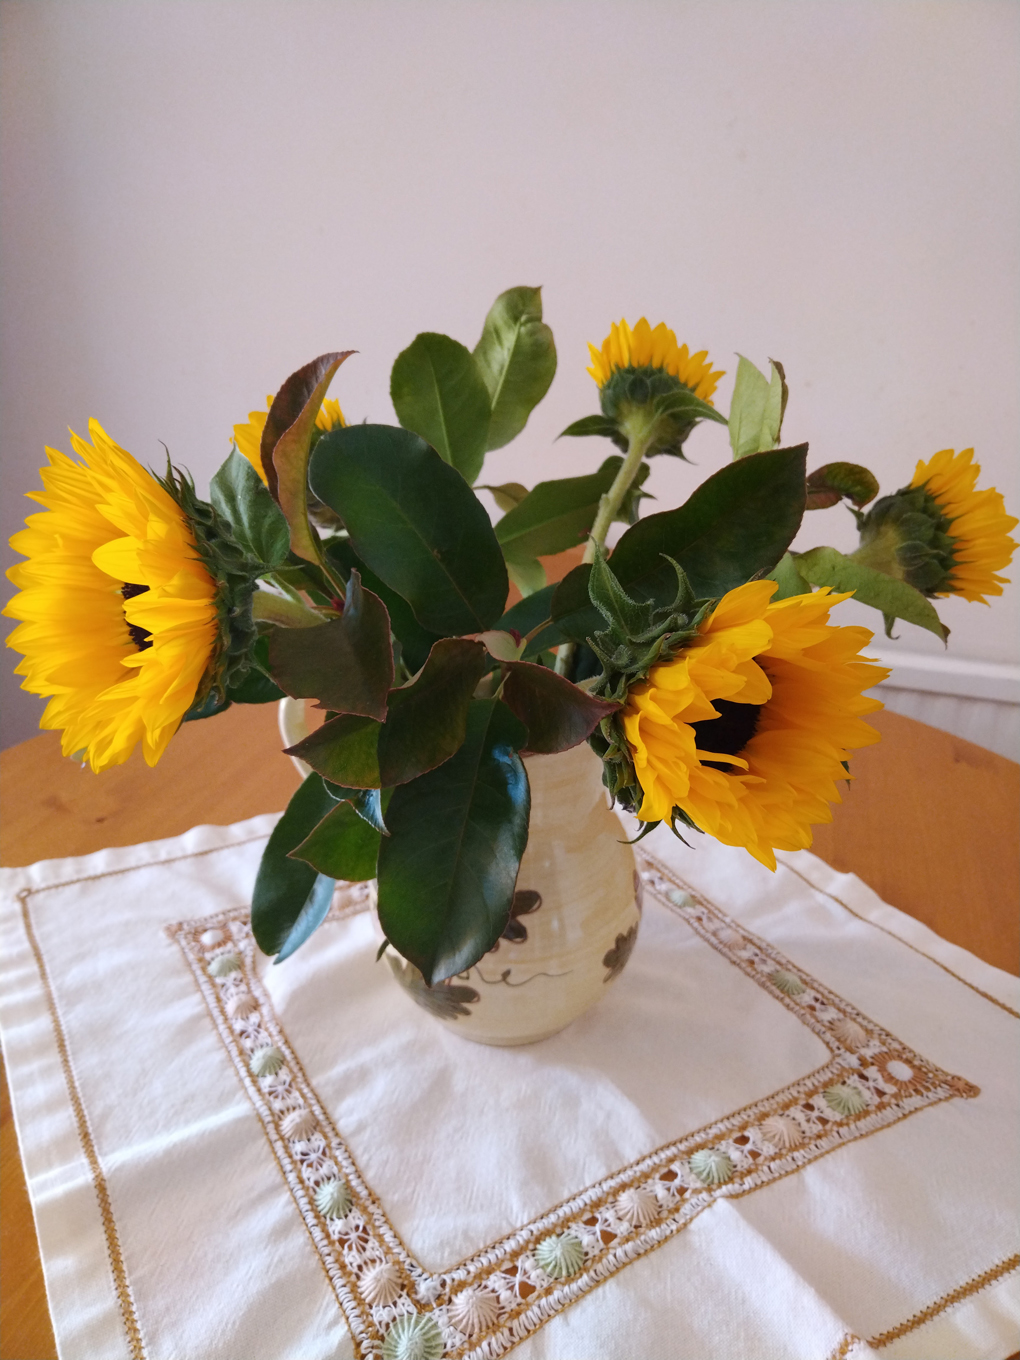 A jug with sunflowers and dark green foliage on a tablege